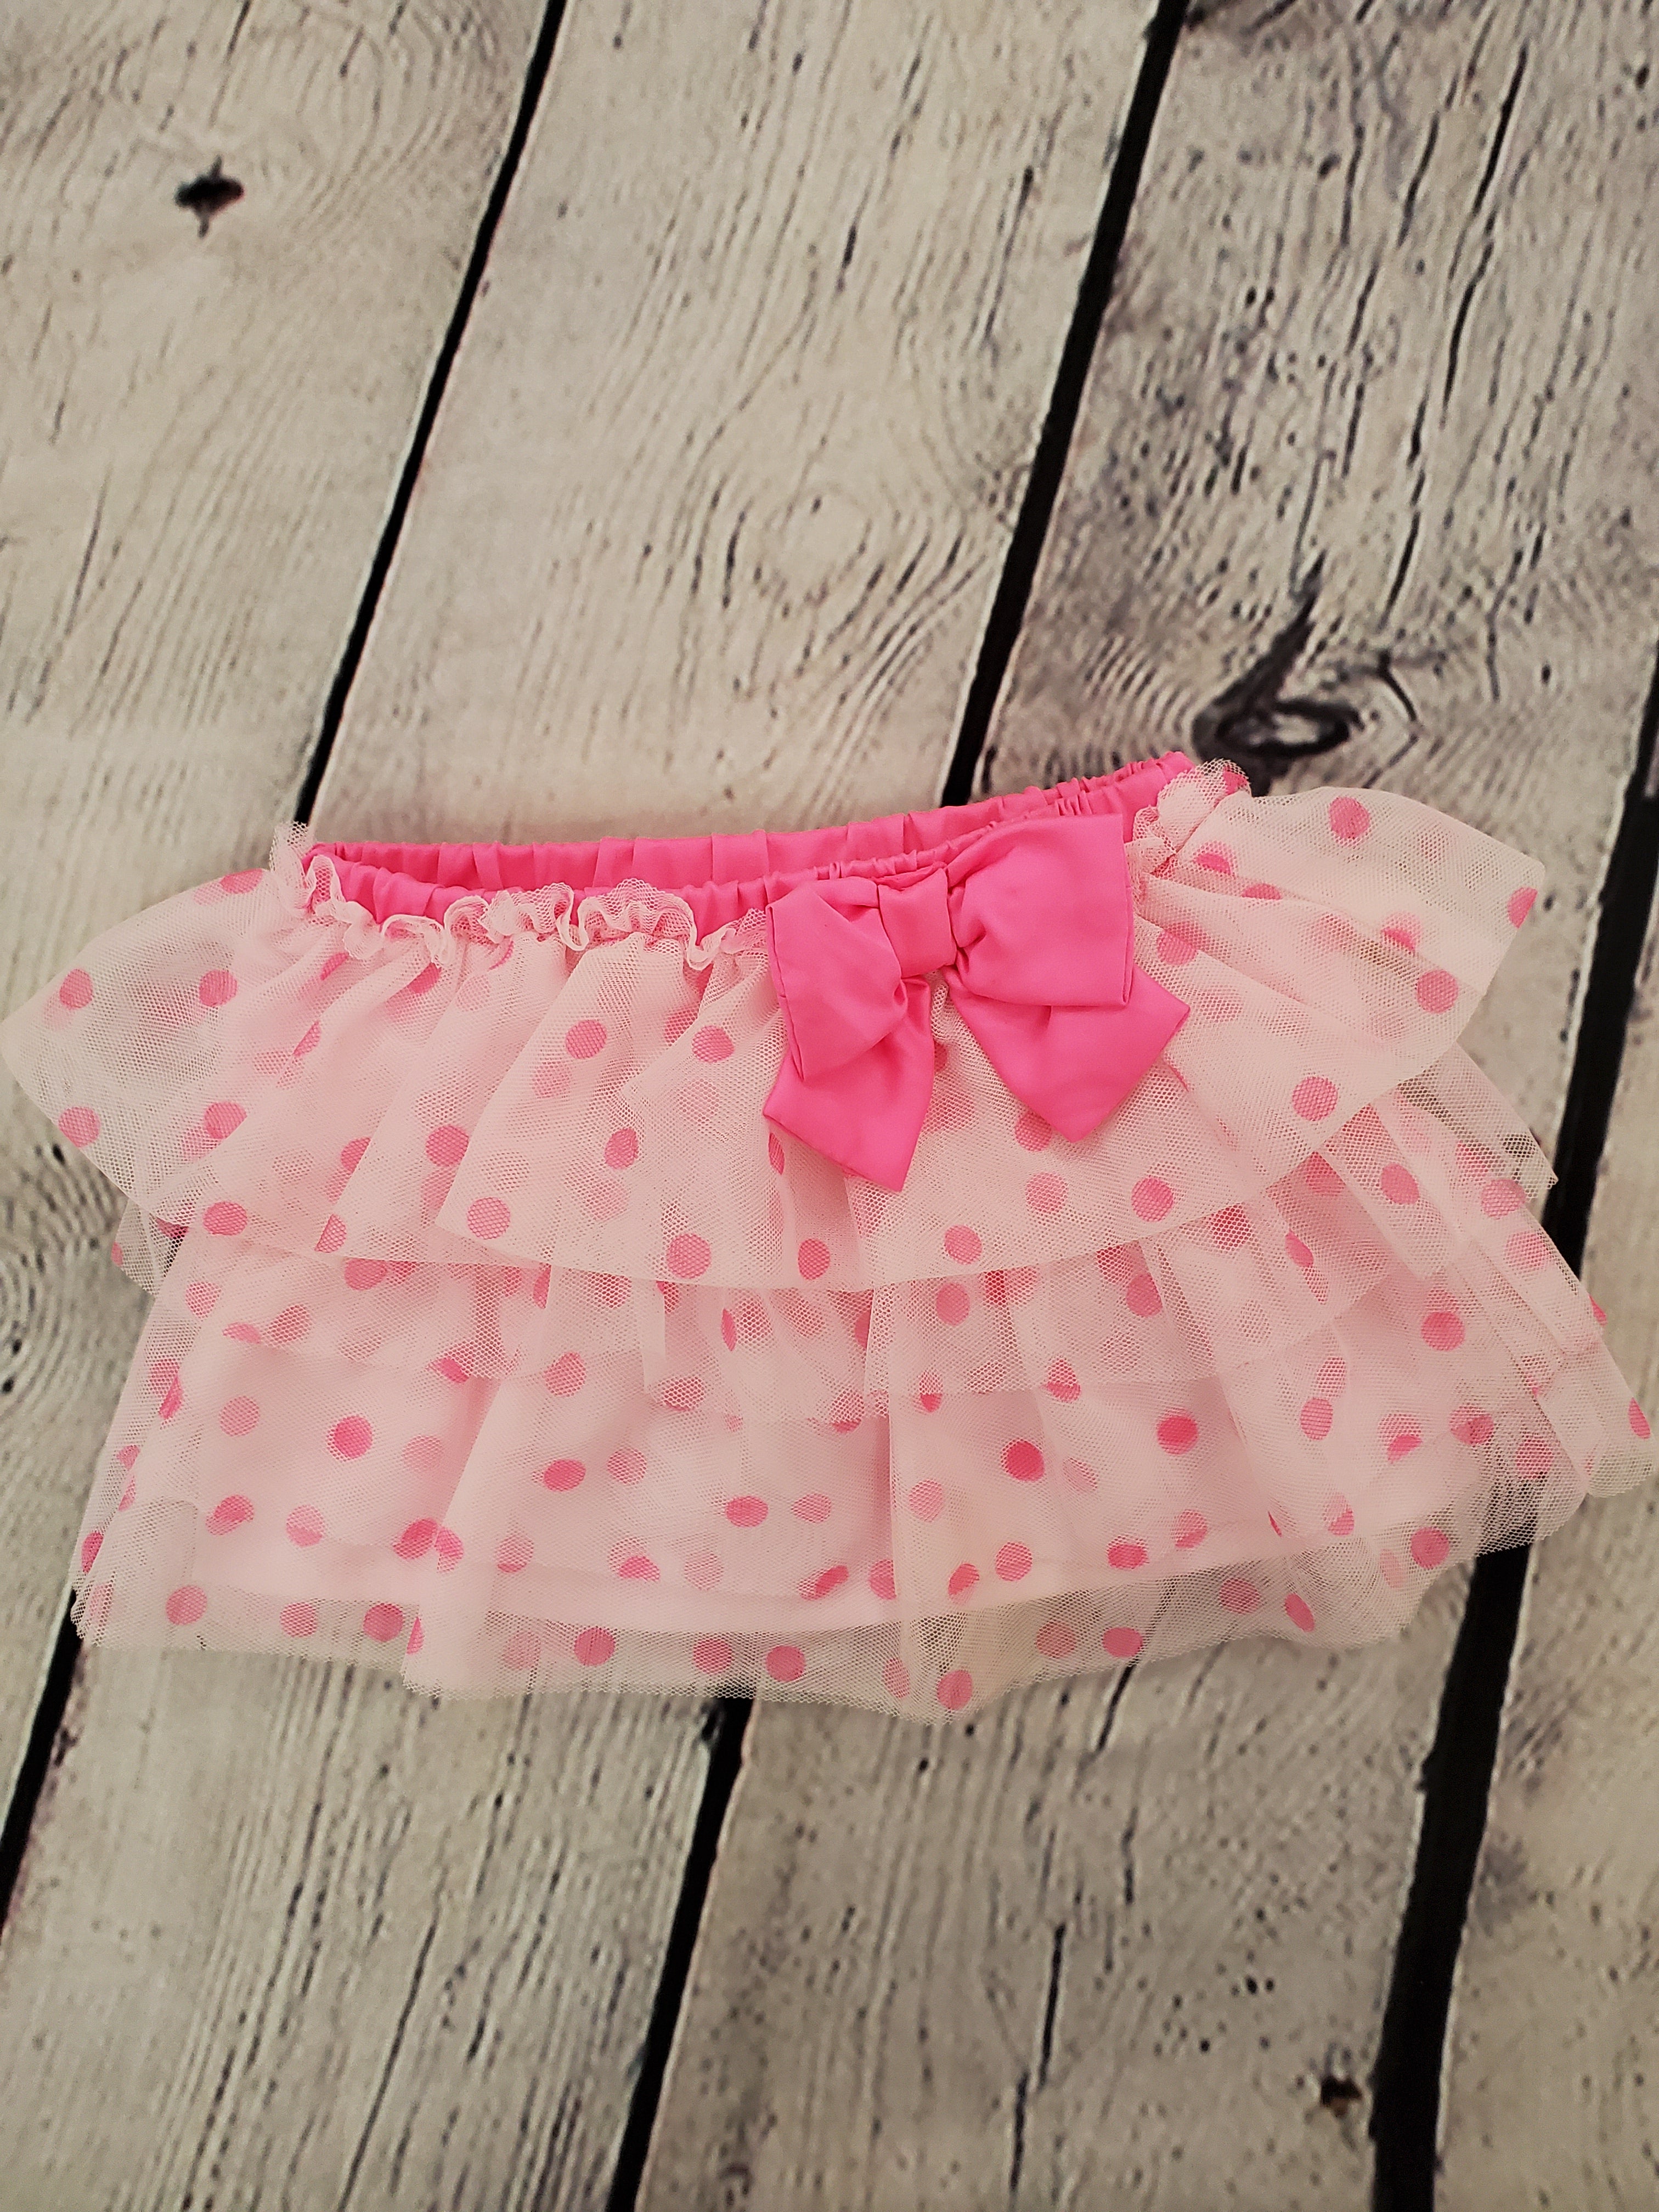 Carter's baby girl white with pink polka dots skirt sz 6 months